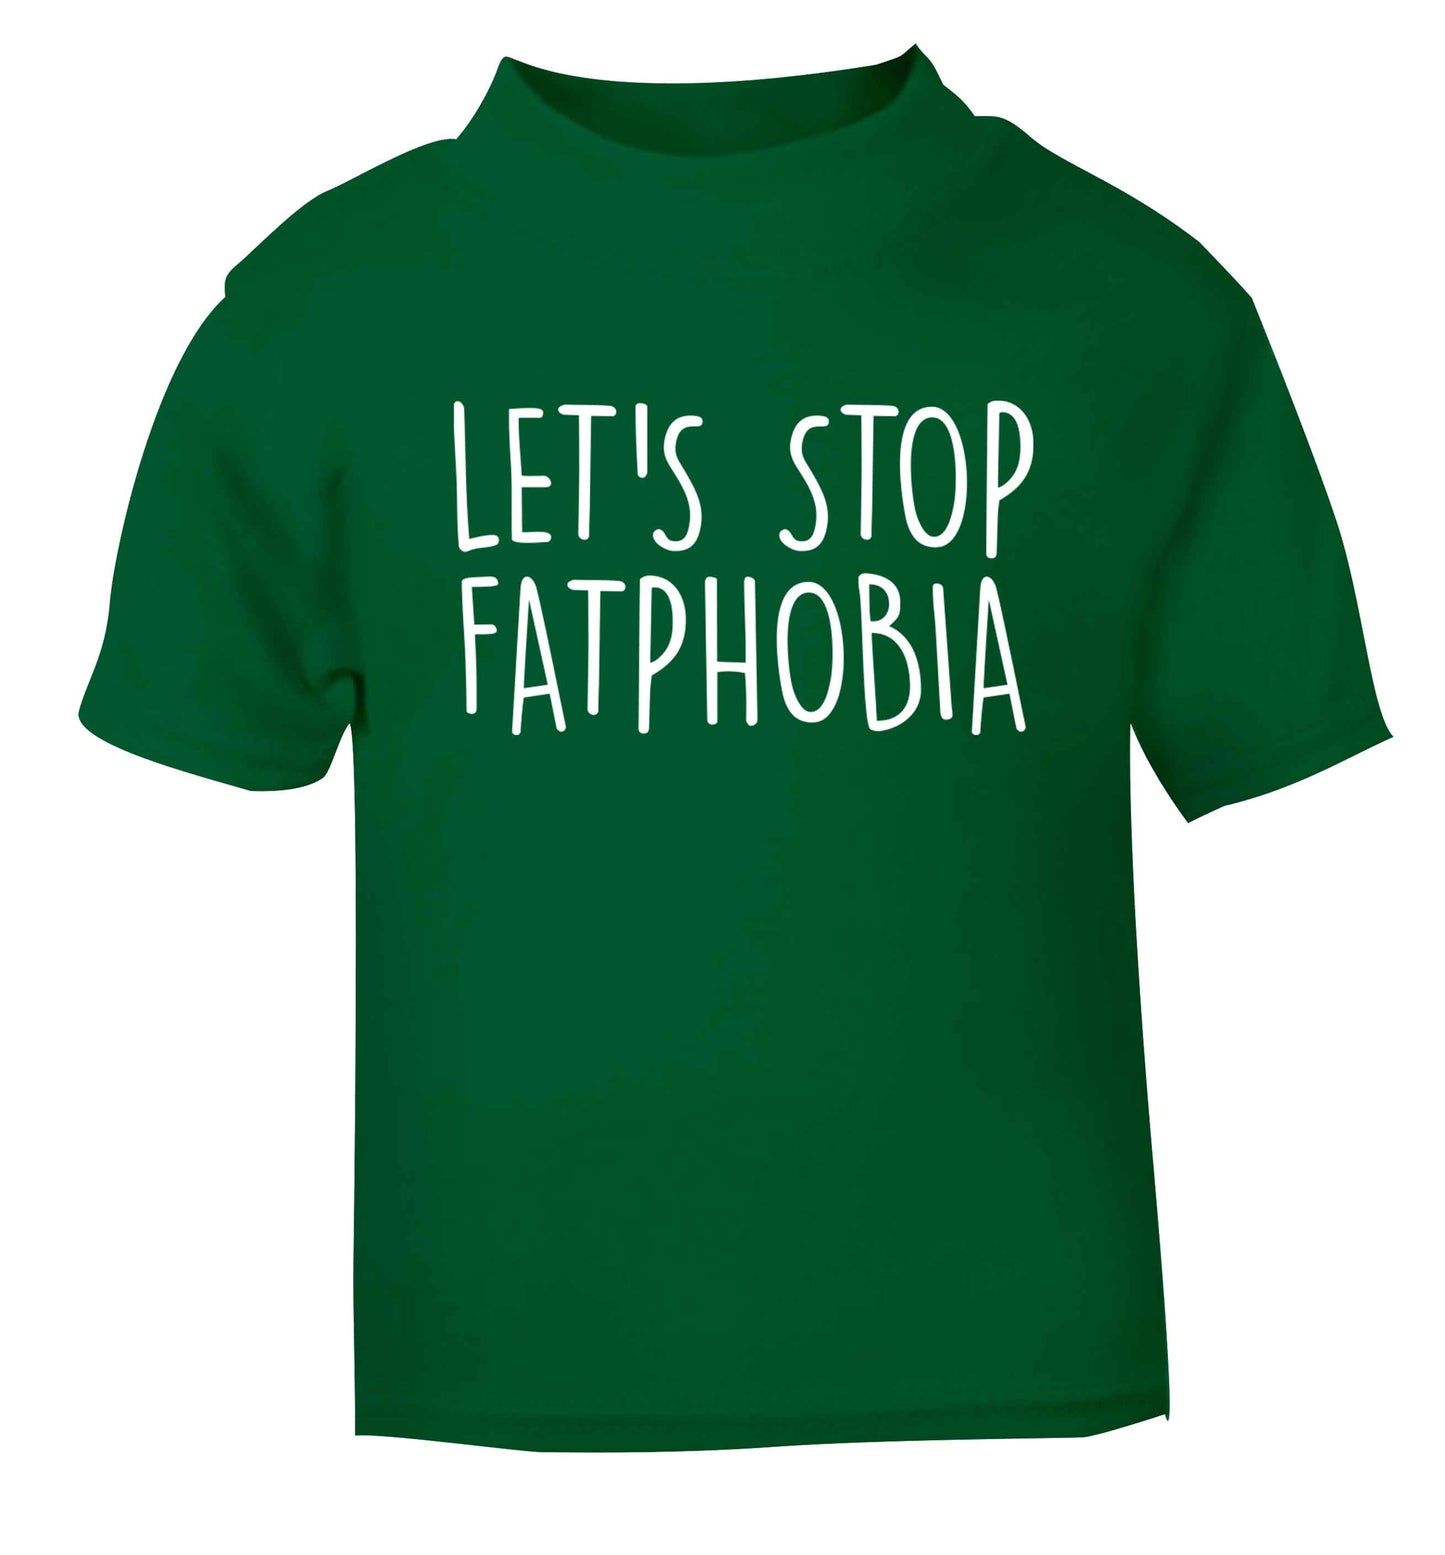 Let's stop fatphobia green baby toddler Tshirt 2 Years